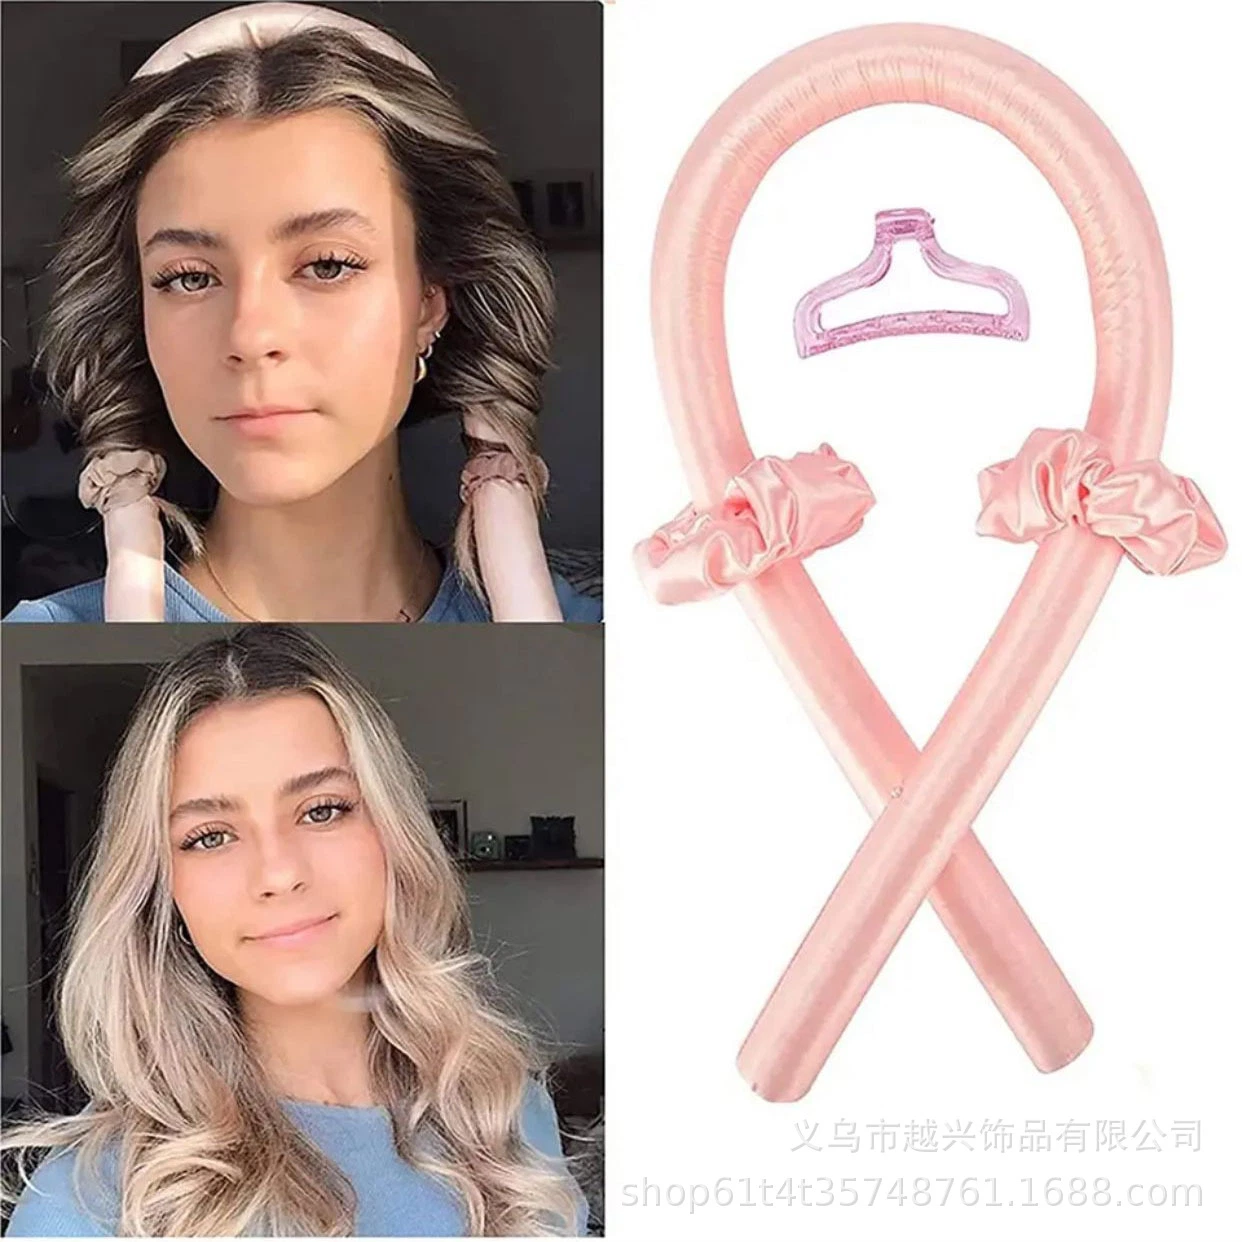 Heatless Curling Rod Headband No Heat Silk Ribbon Hair Curls with Hair Claw Clip Lazy Natural Soft Wave DIY Hair Styling Tool for Sleep in Overnight